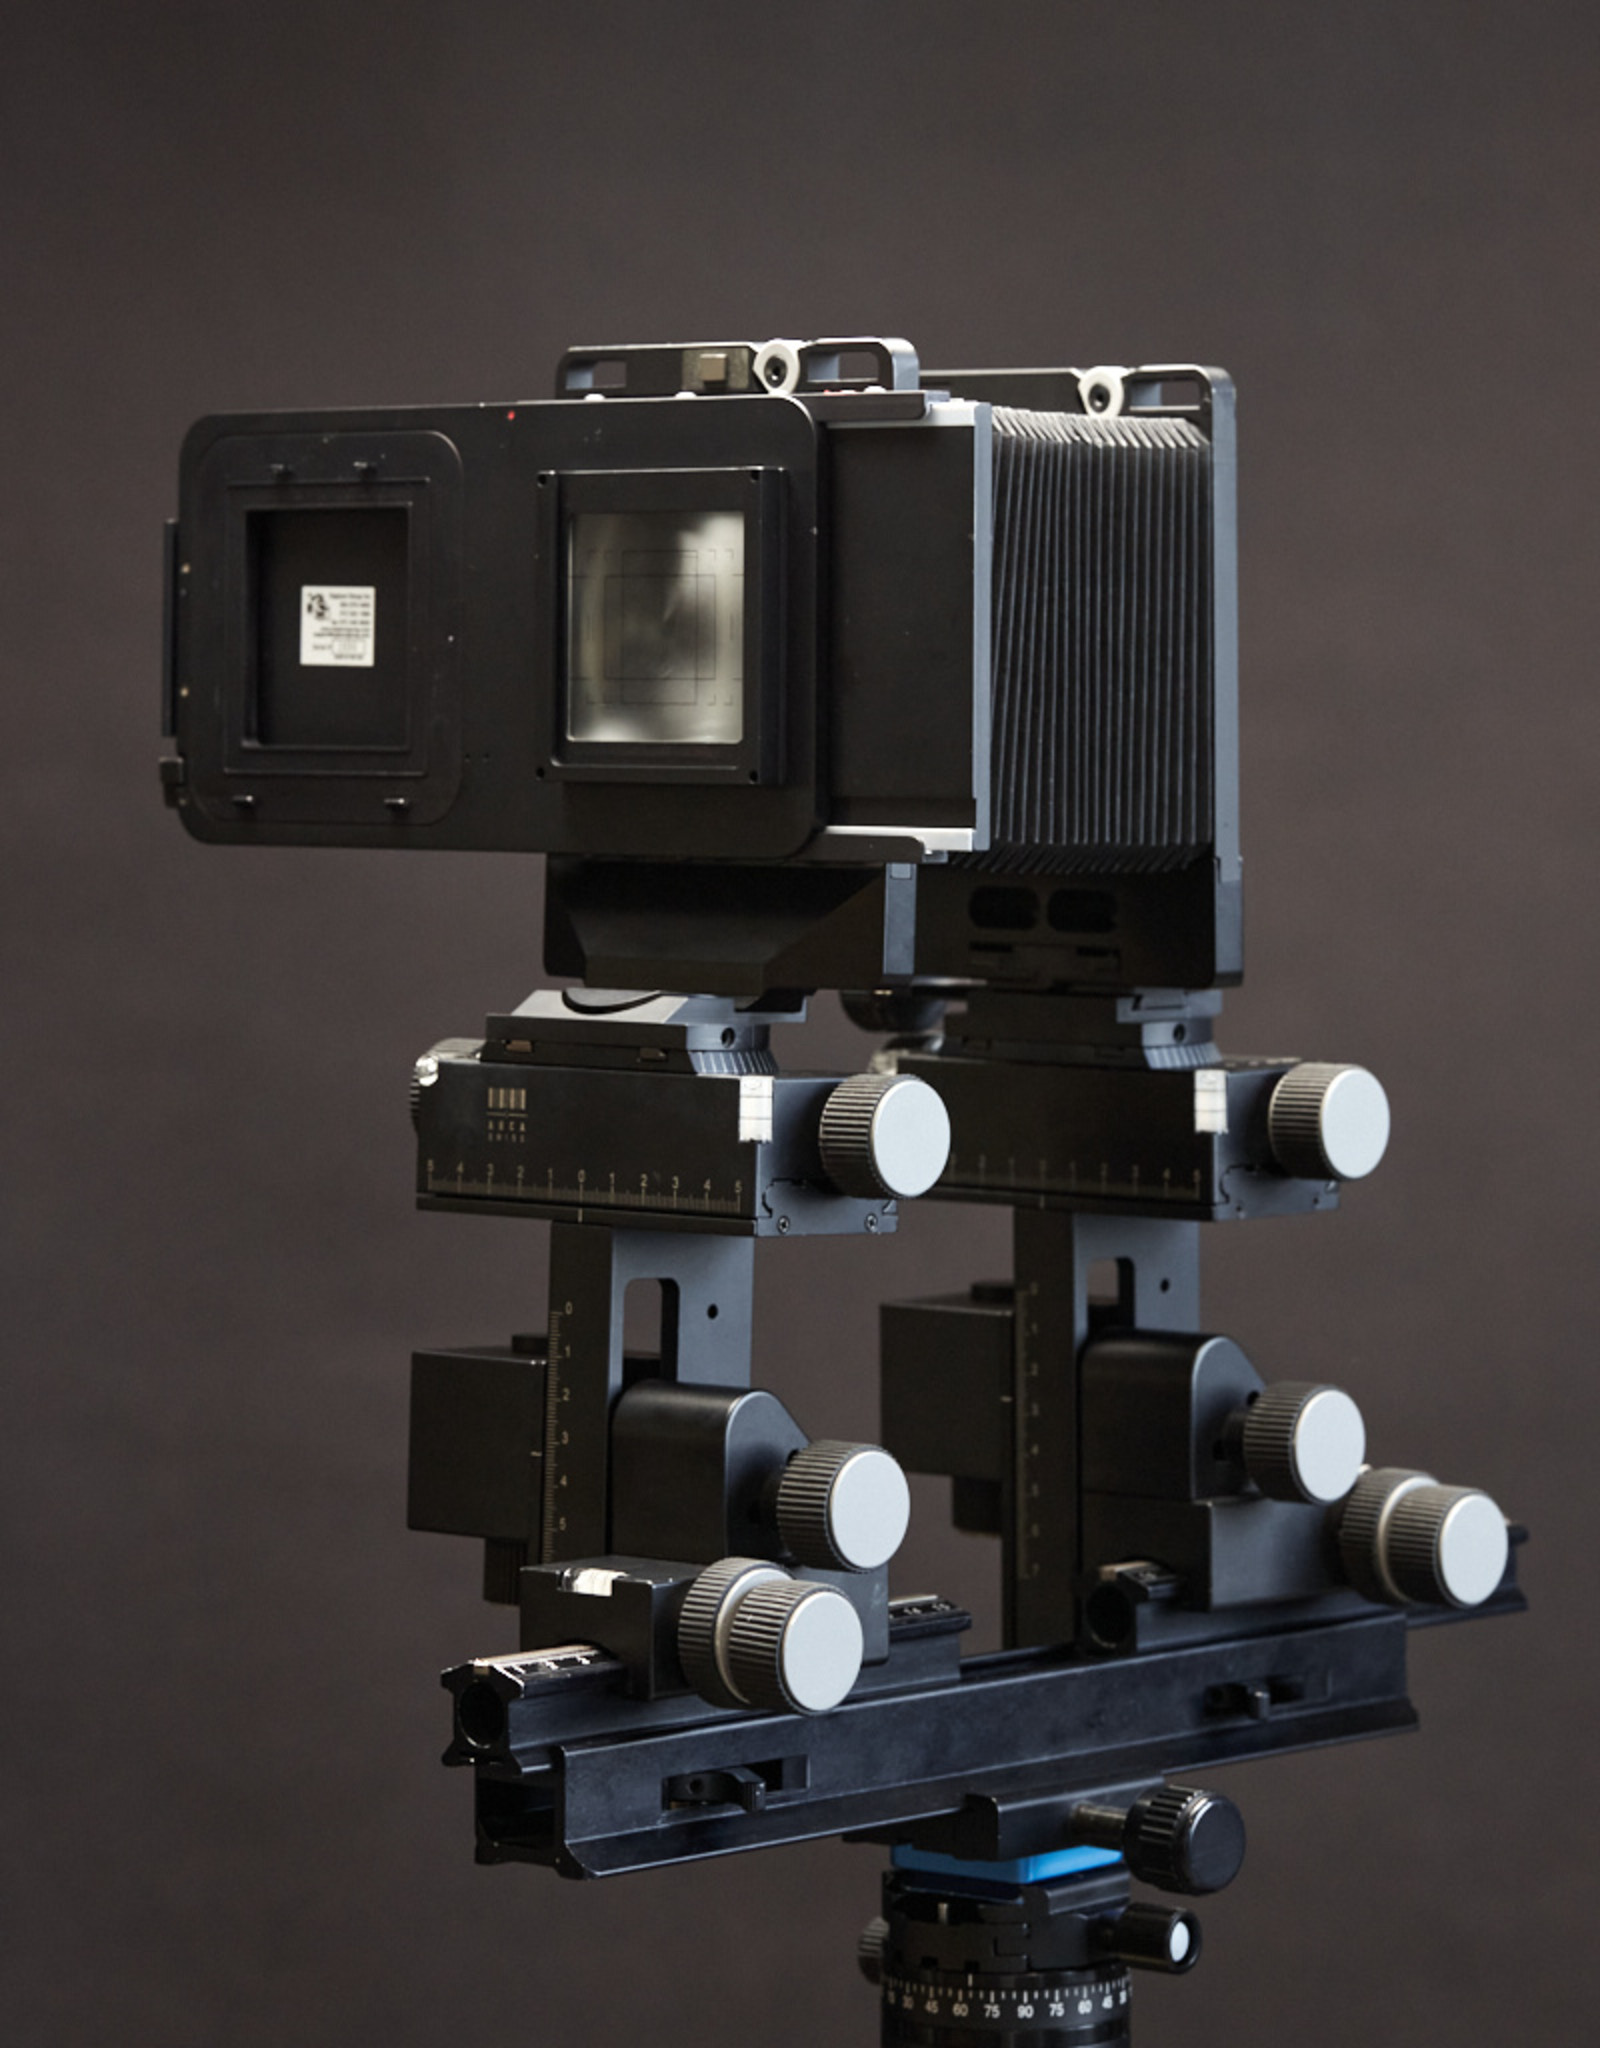 Arca Swiss USED - Arca Swiss Monolith 6x9 View Camera with standard and wide bellows, plus Kapture Group Sliding Back in V-Mount. Condition 8.5